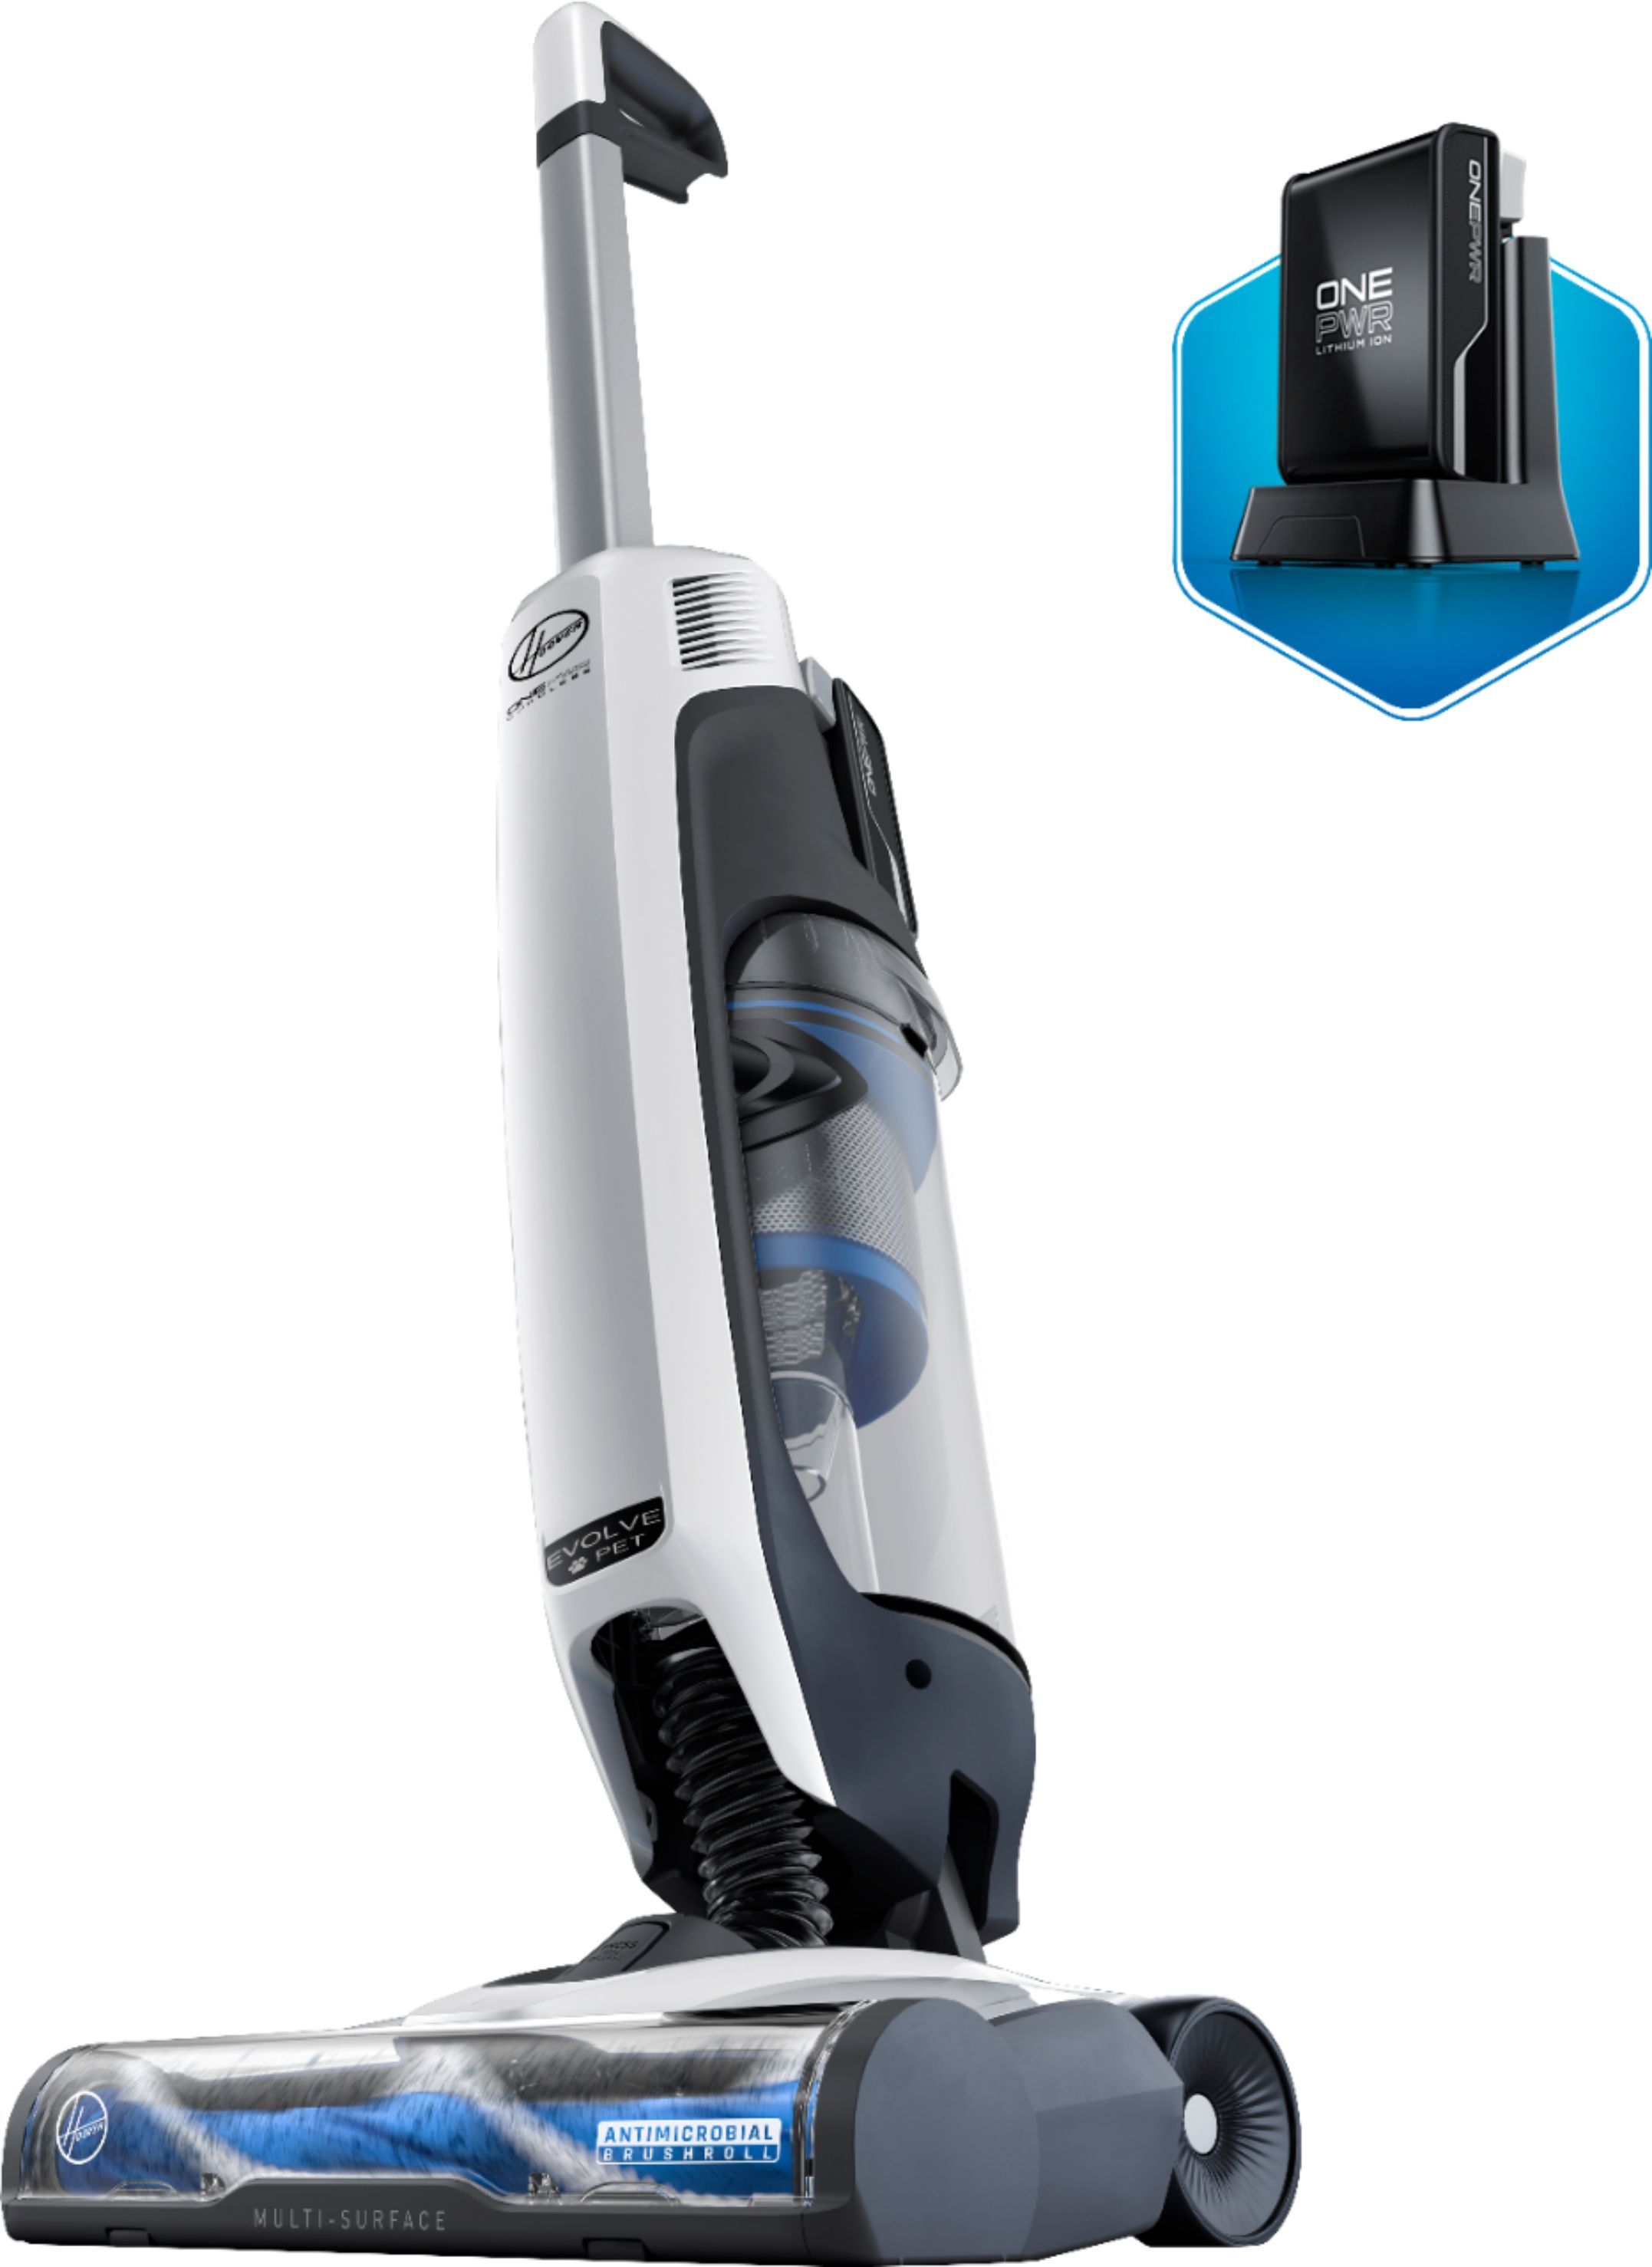 Hoover ONEPWR Evolve Pet Cordless Vacuum White BH53420 - Best Buy